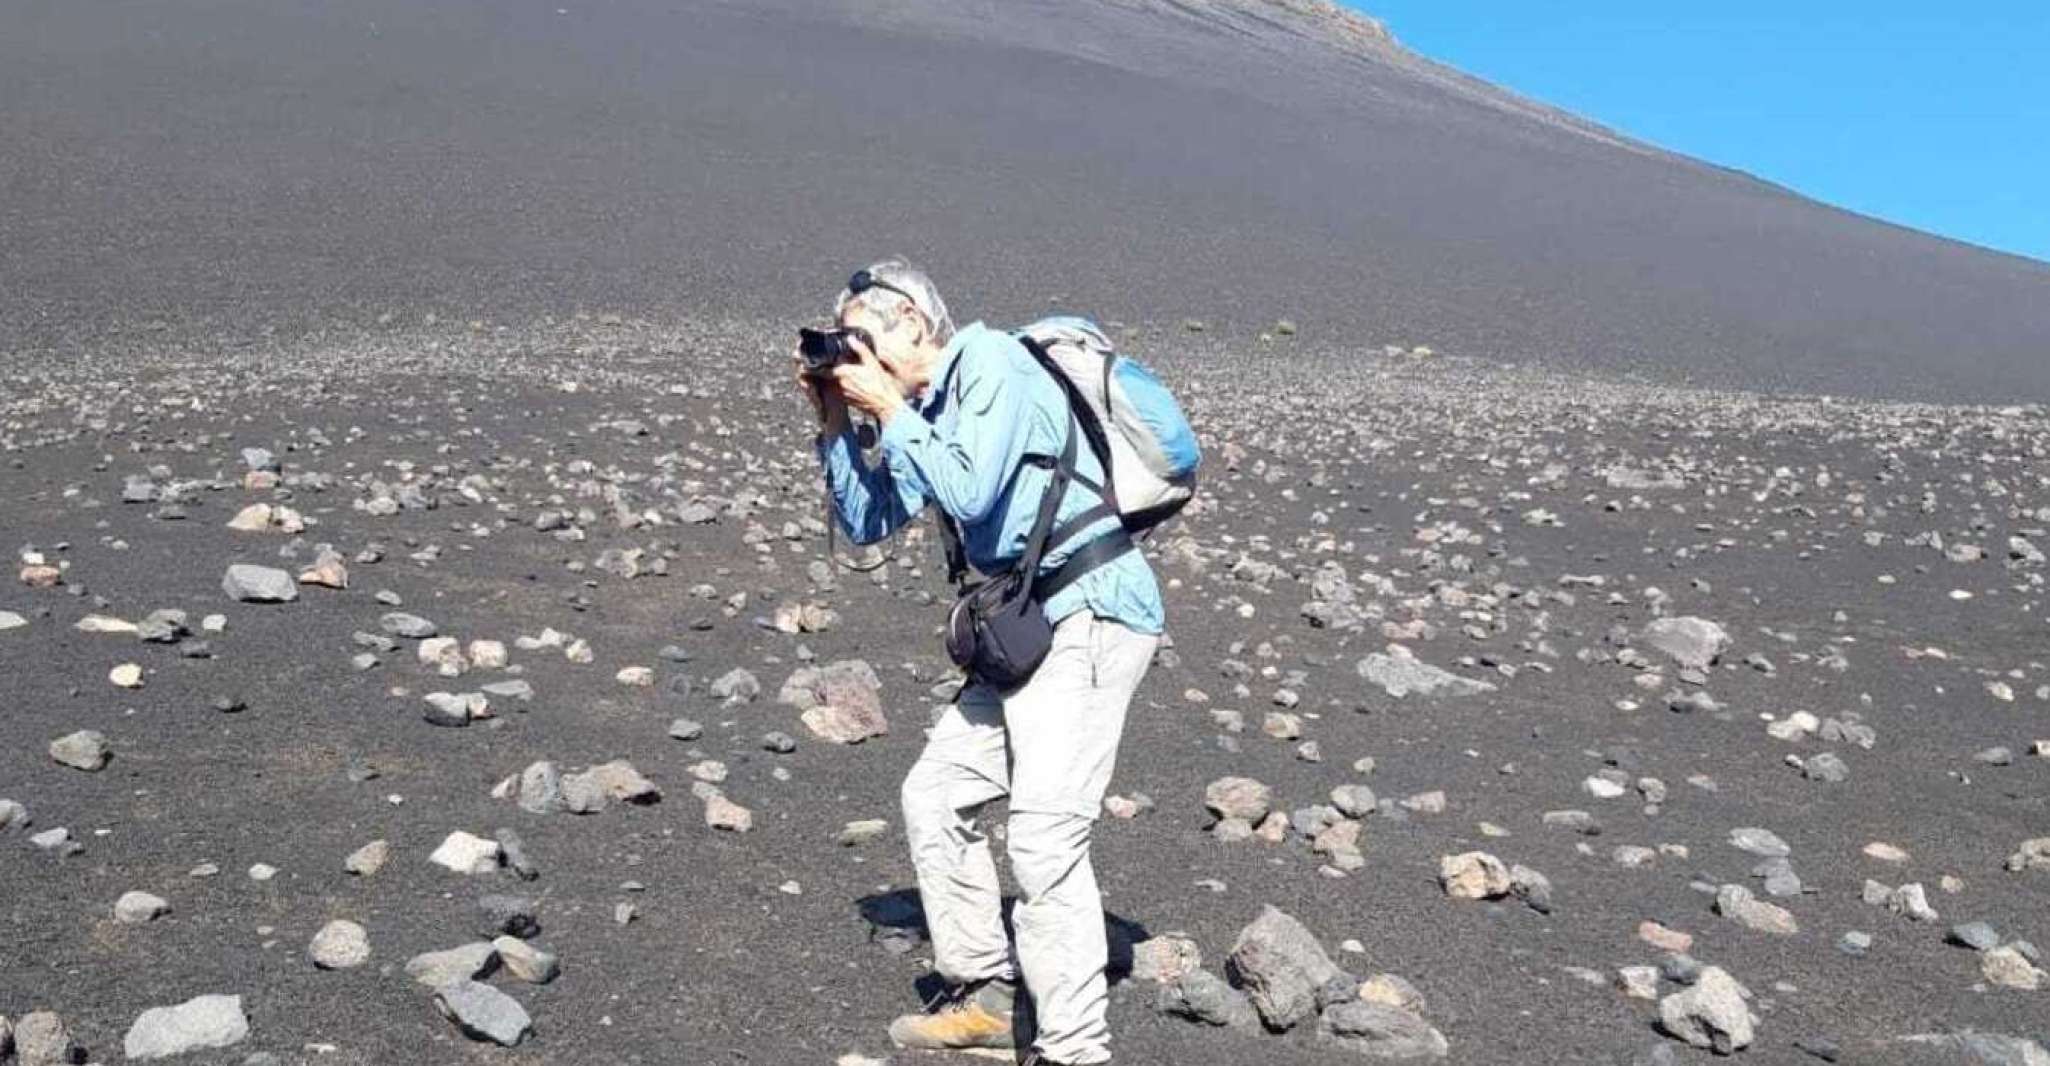 A journey to discover the volcano from S. Filipe - Housity